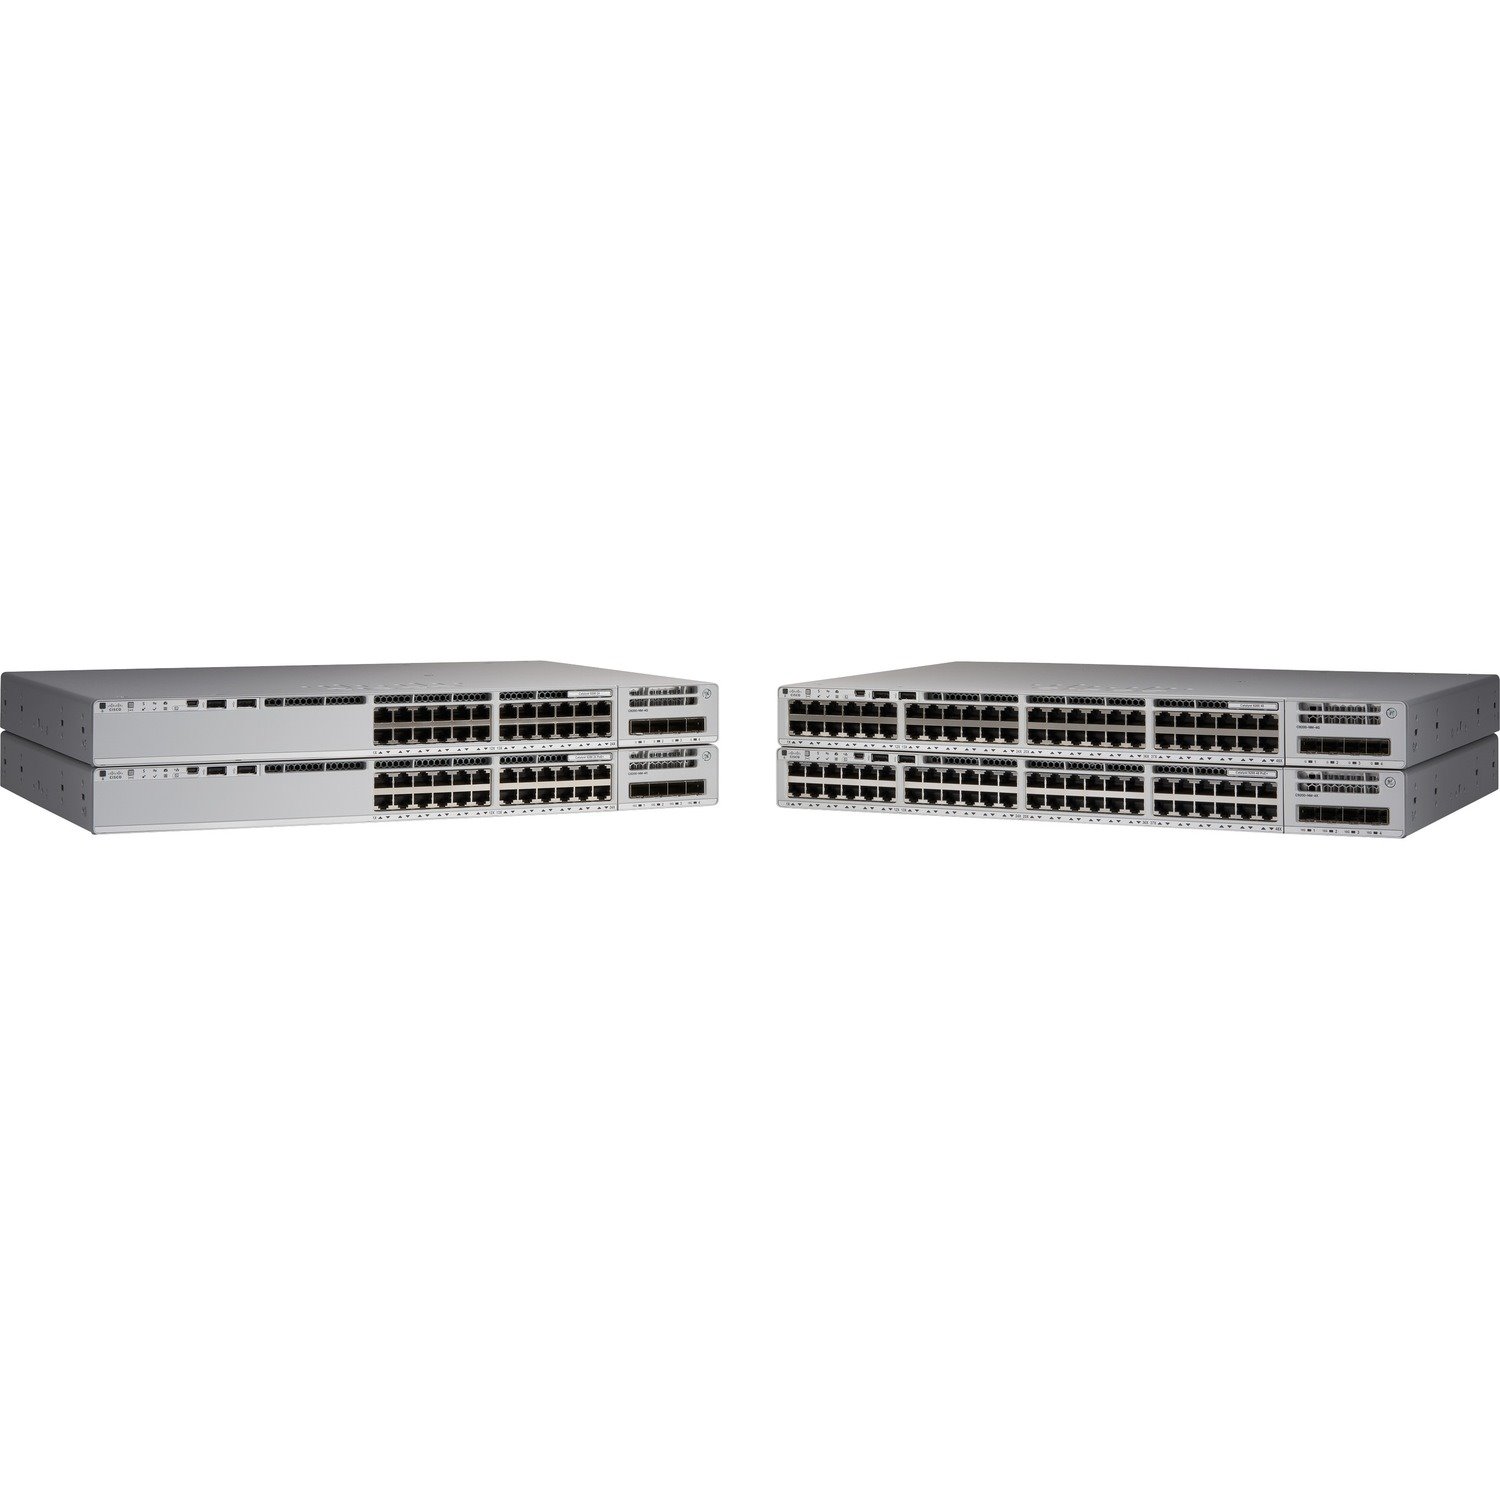 Cisco Catalyst 9200 C9200-48PB-A 48 Ports Manageable Ethernet Switch